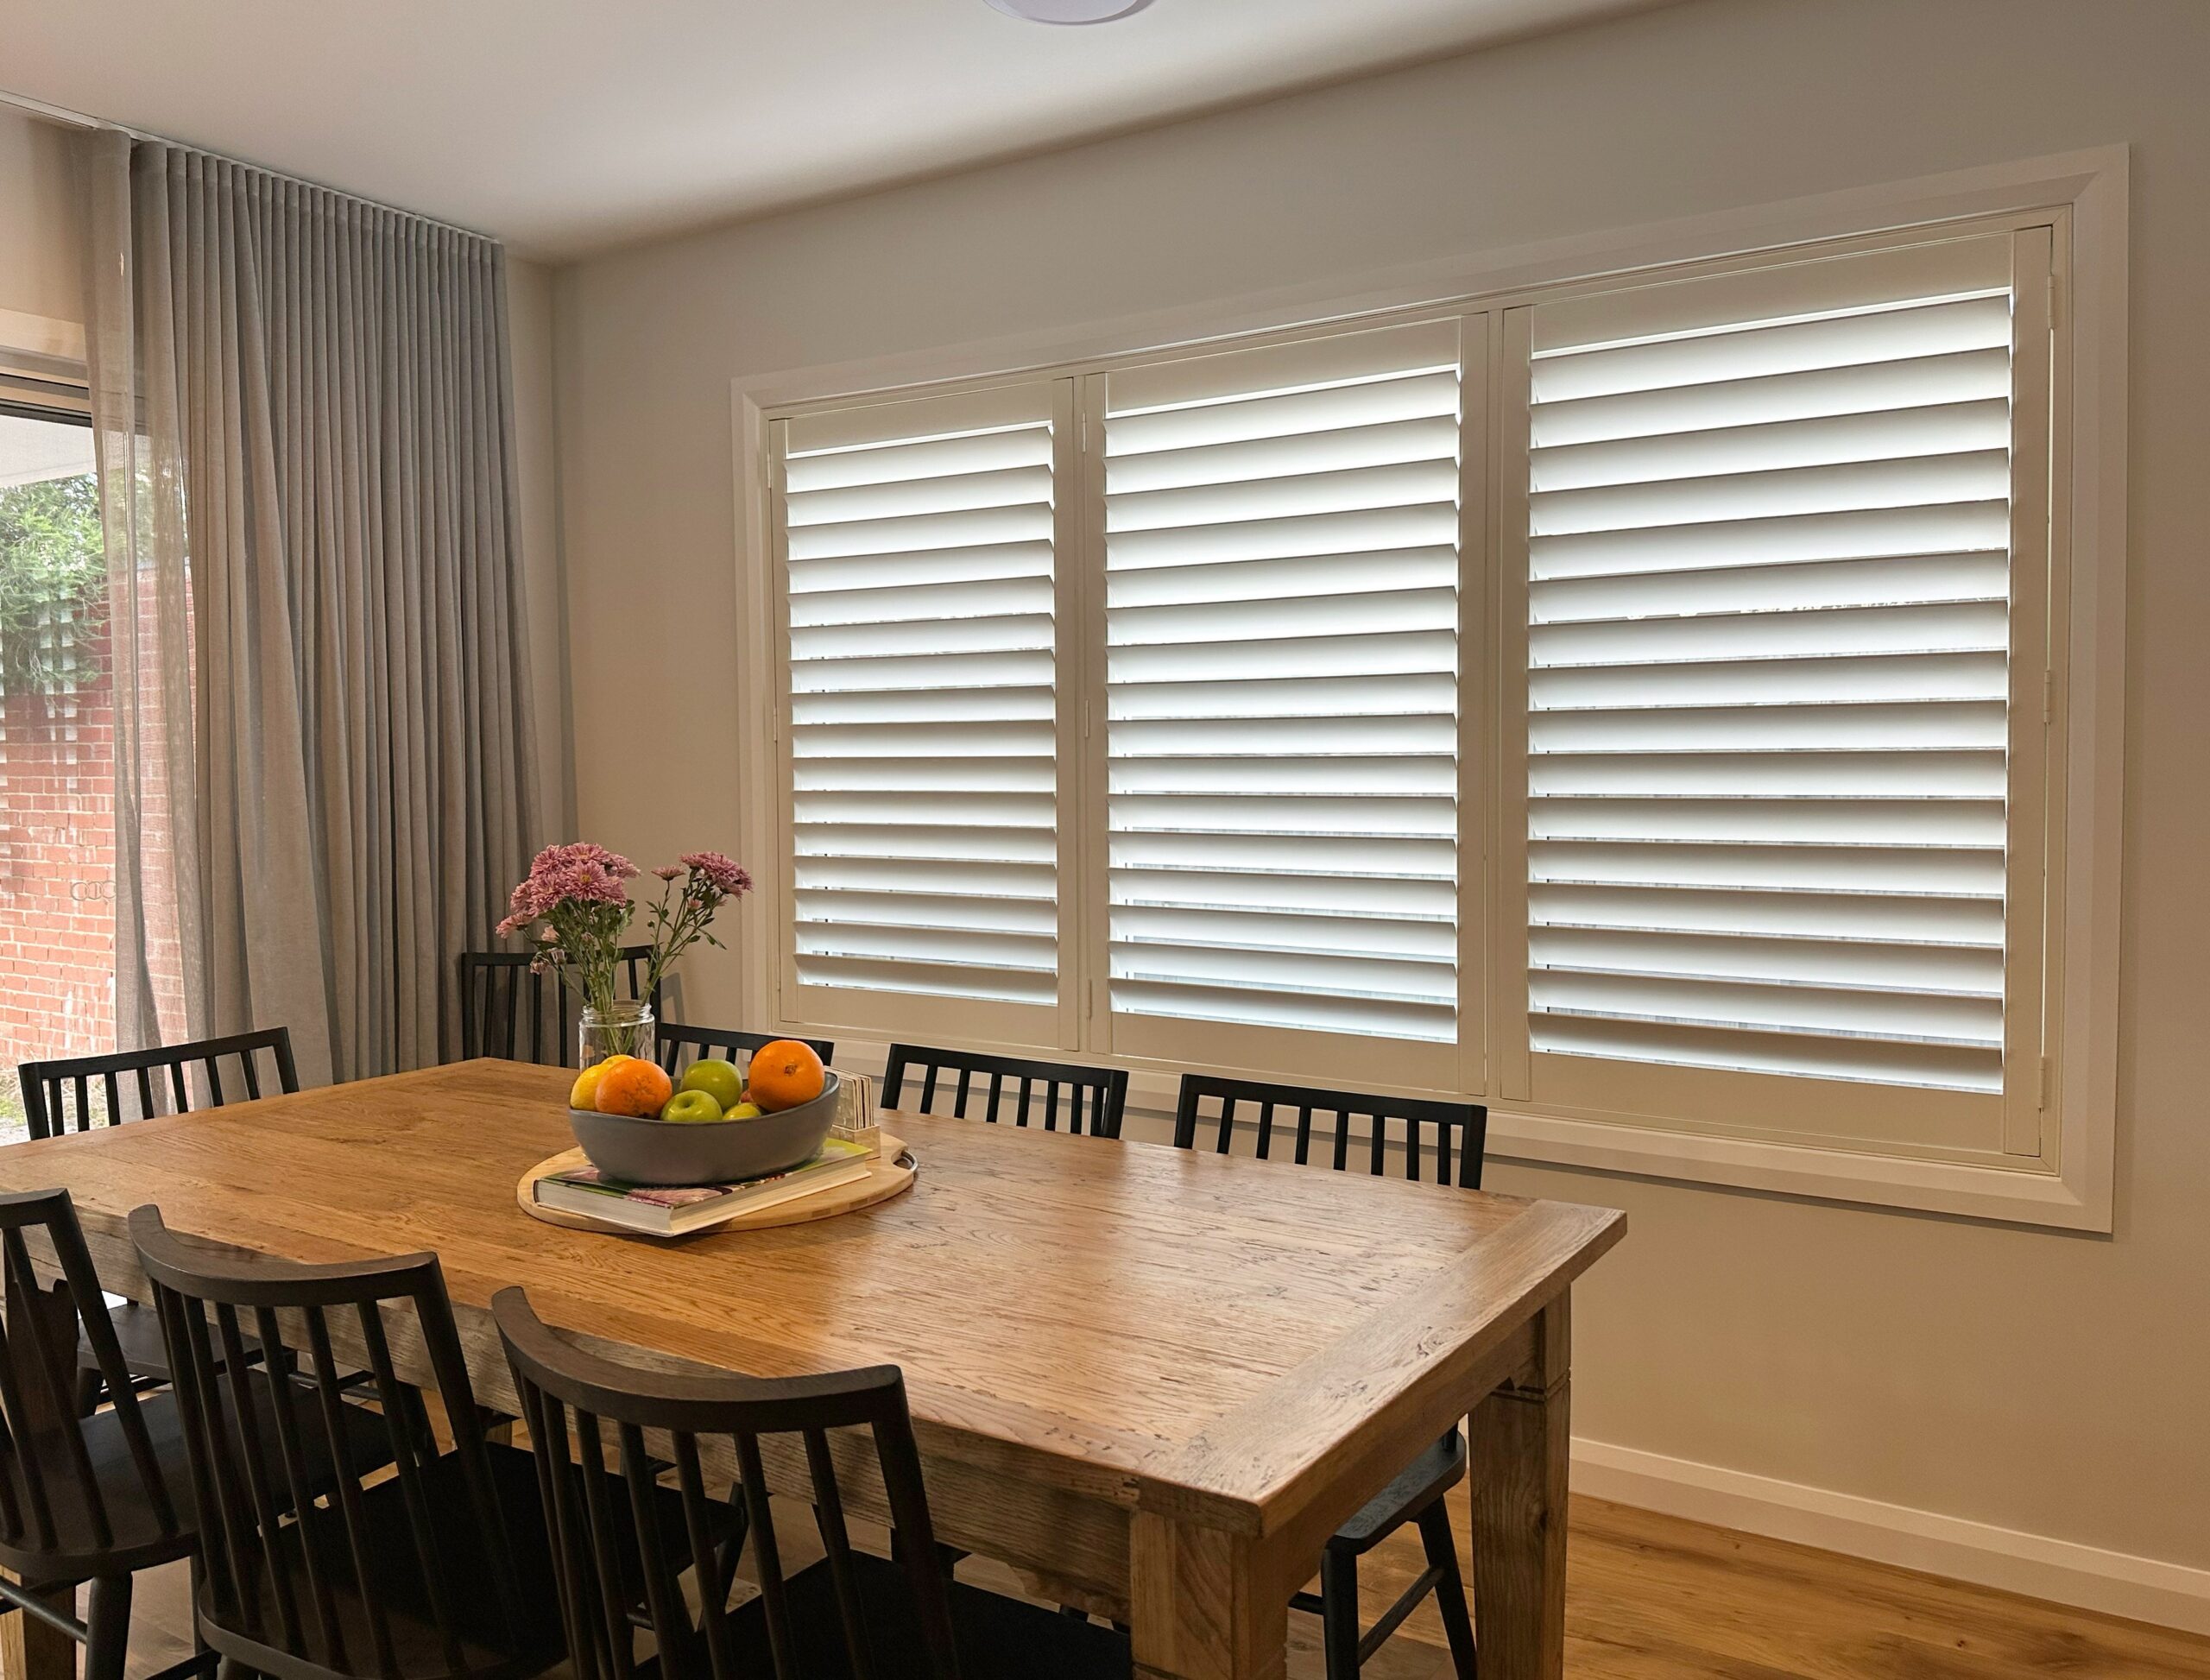 PVC Plantation Shutters & Sheer Curtains for a family home in Mentone